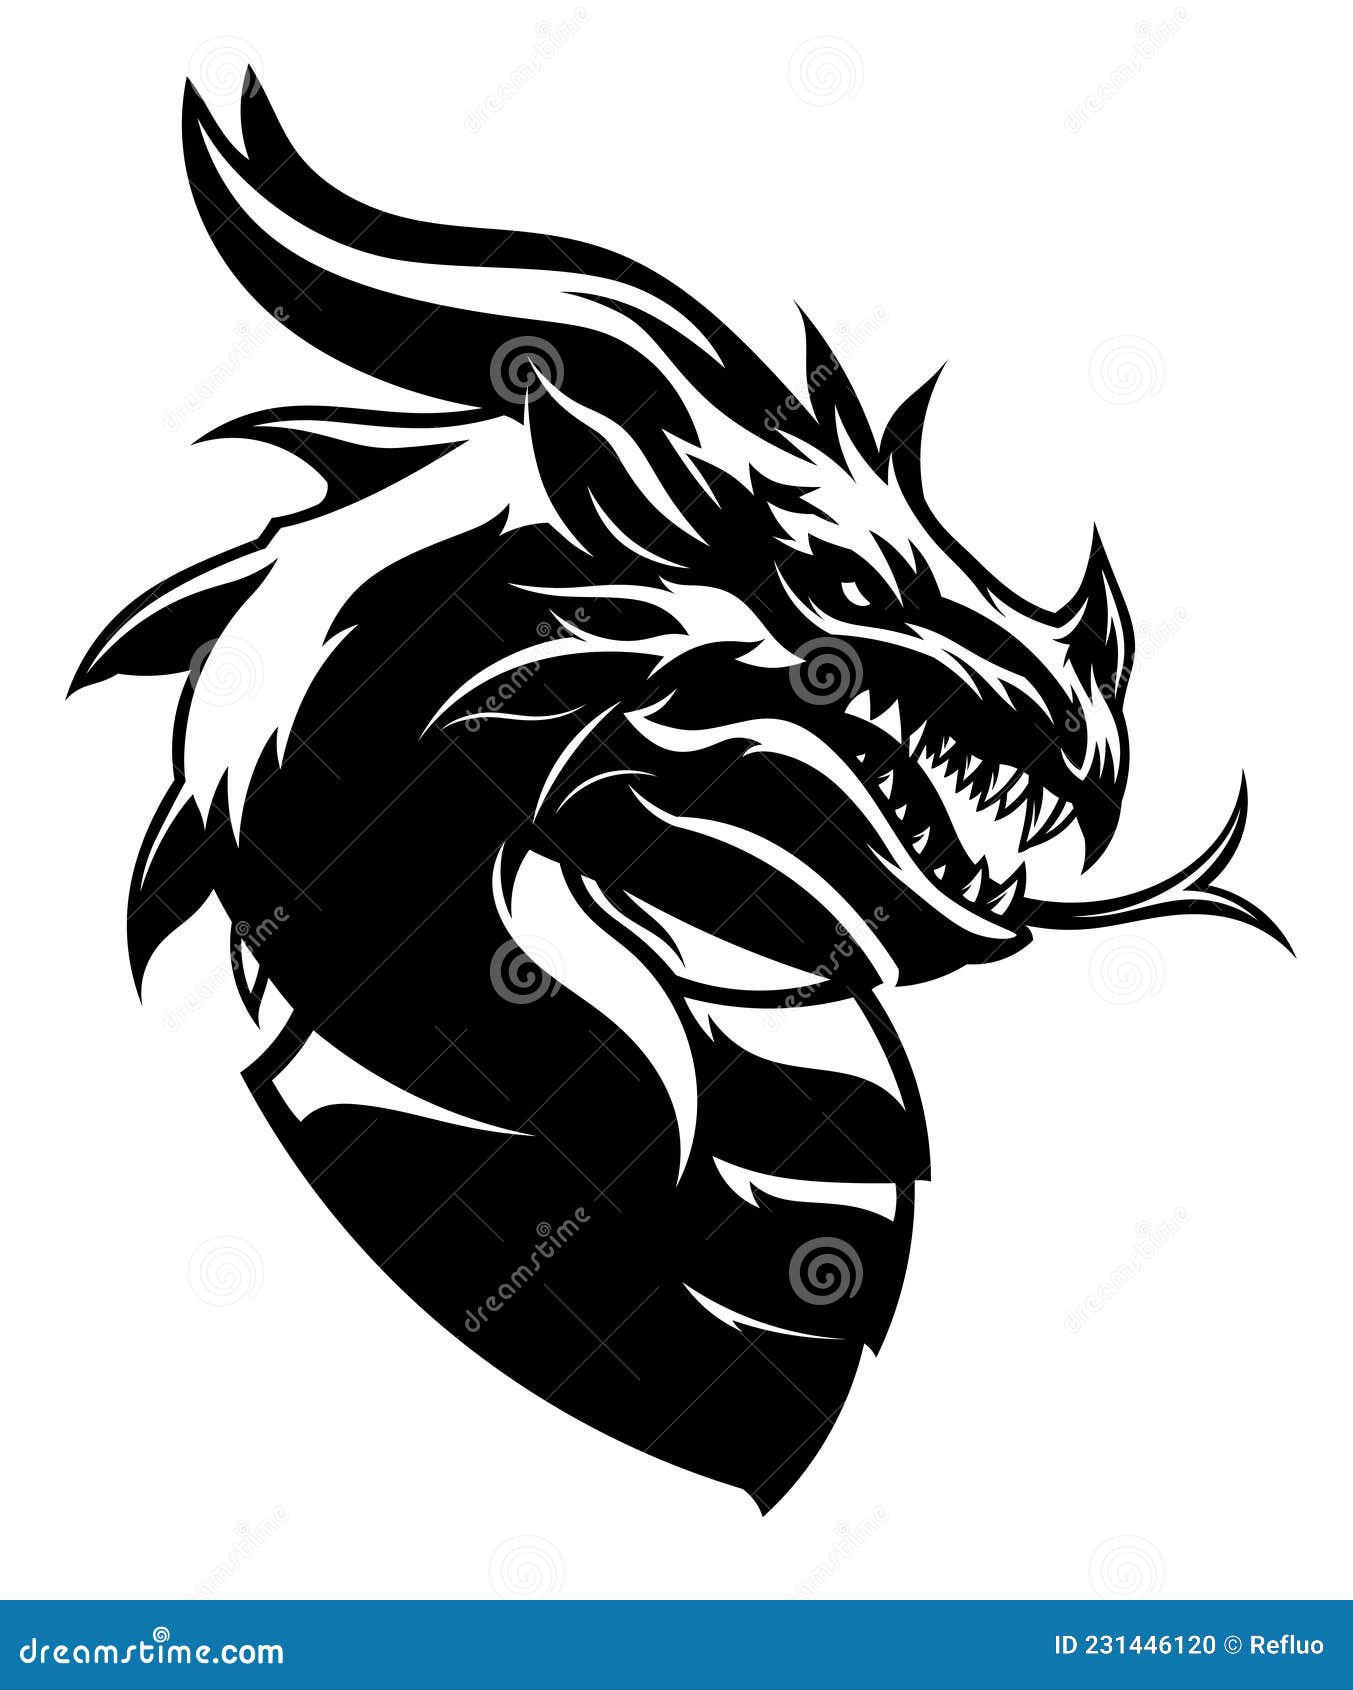 Dragon Head Black and White Stock Vector - Illustration of isolated ...